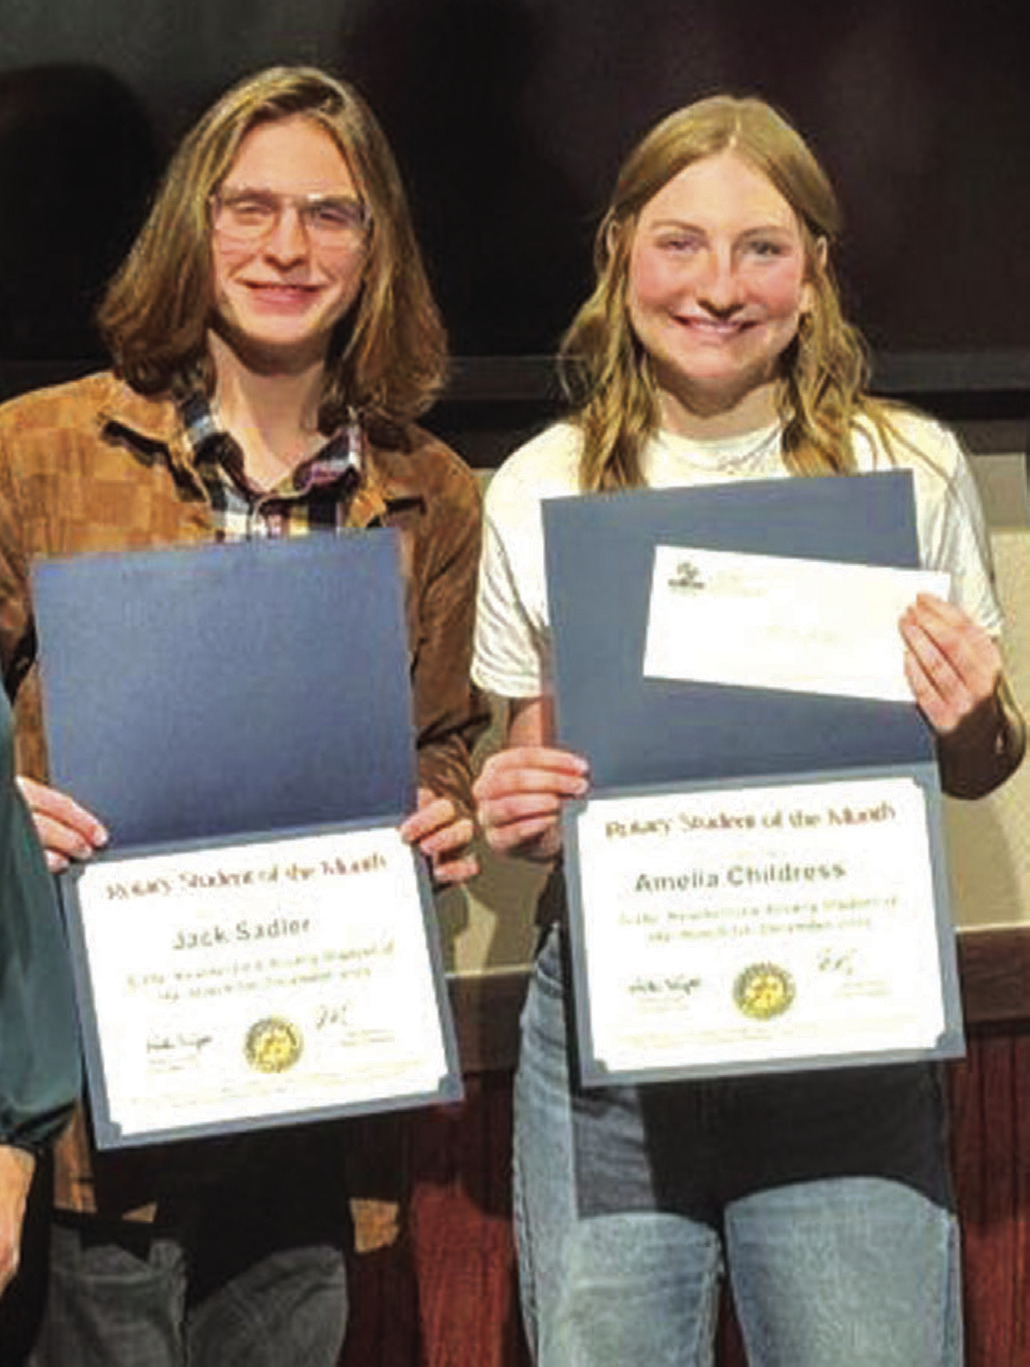 ◄ Jack Sadler and Amelia Childress are honored as the Rotary students of the month for December.